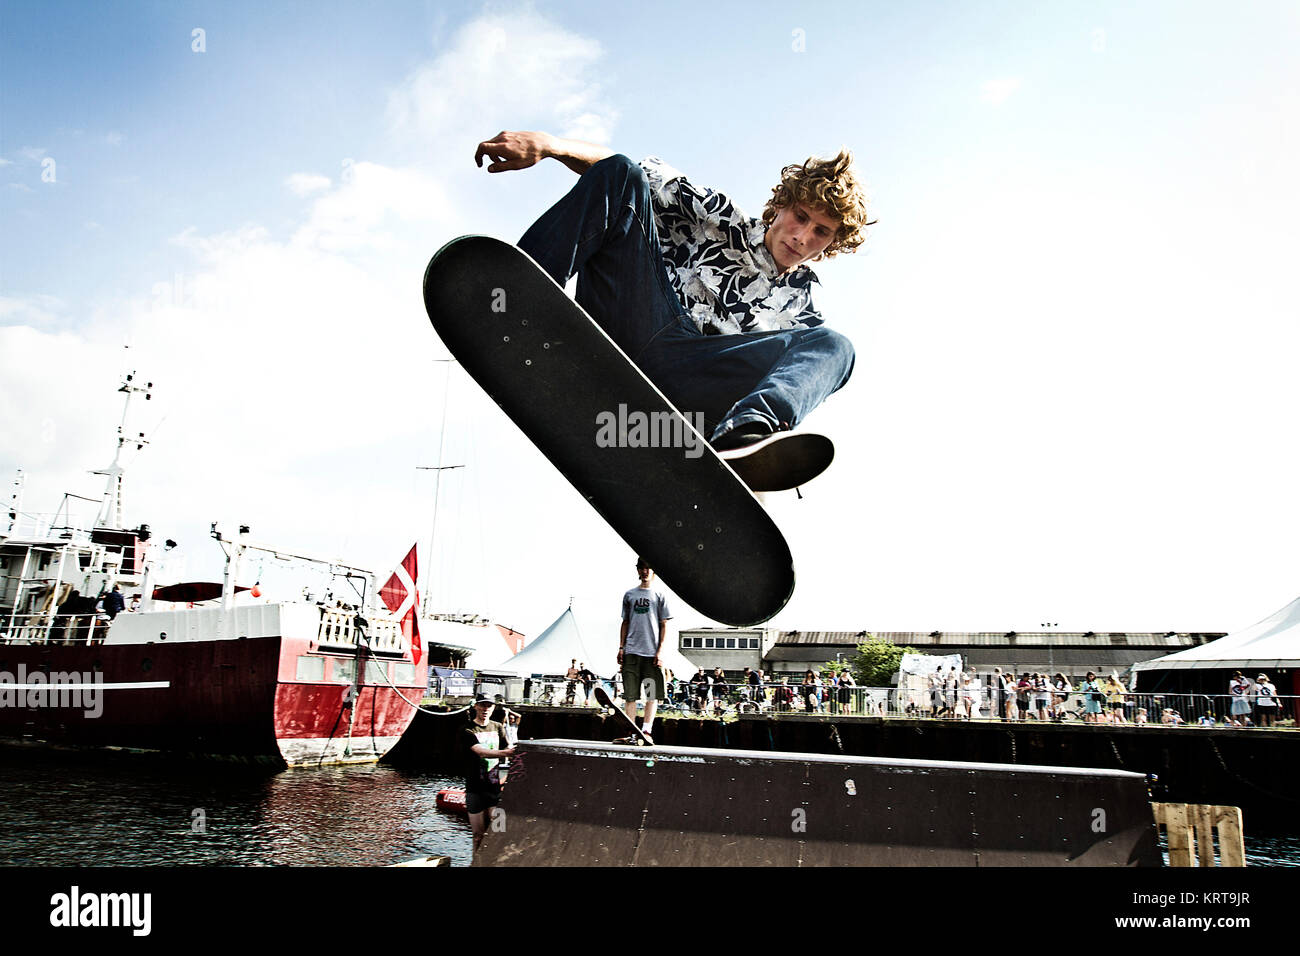 A skater is doing tricks on his skate board at a half pipe ramp in Stock  Photo - Alamy